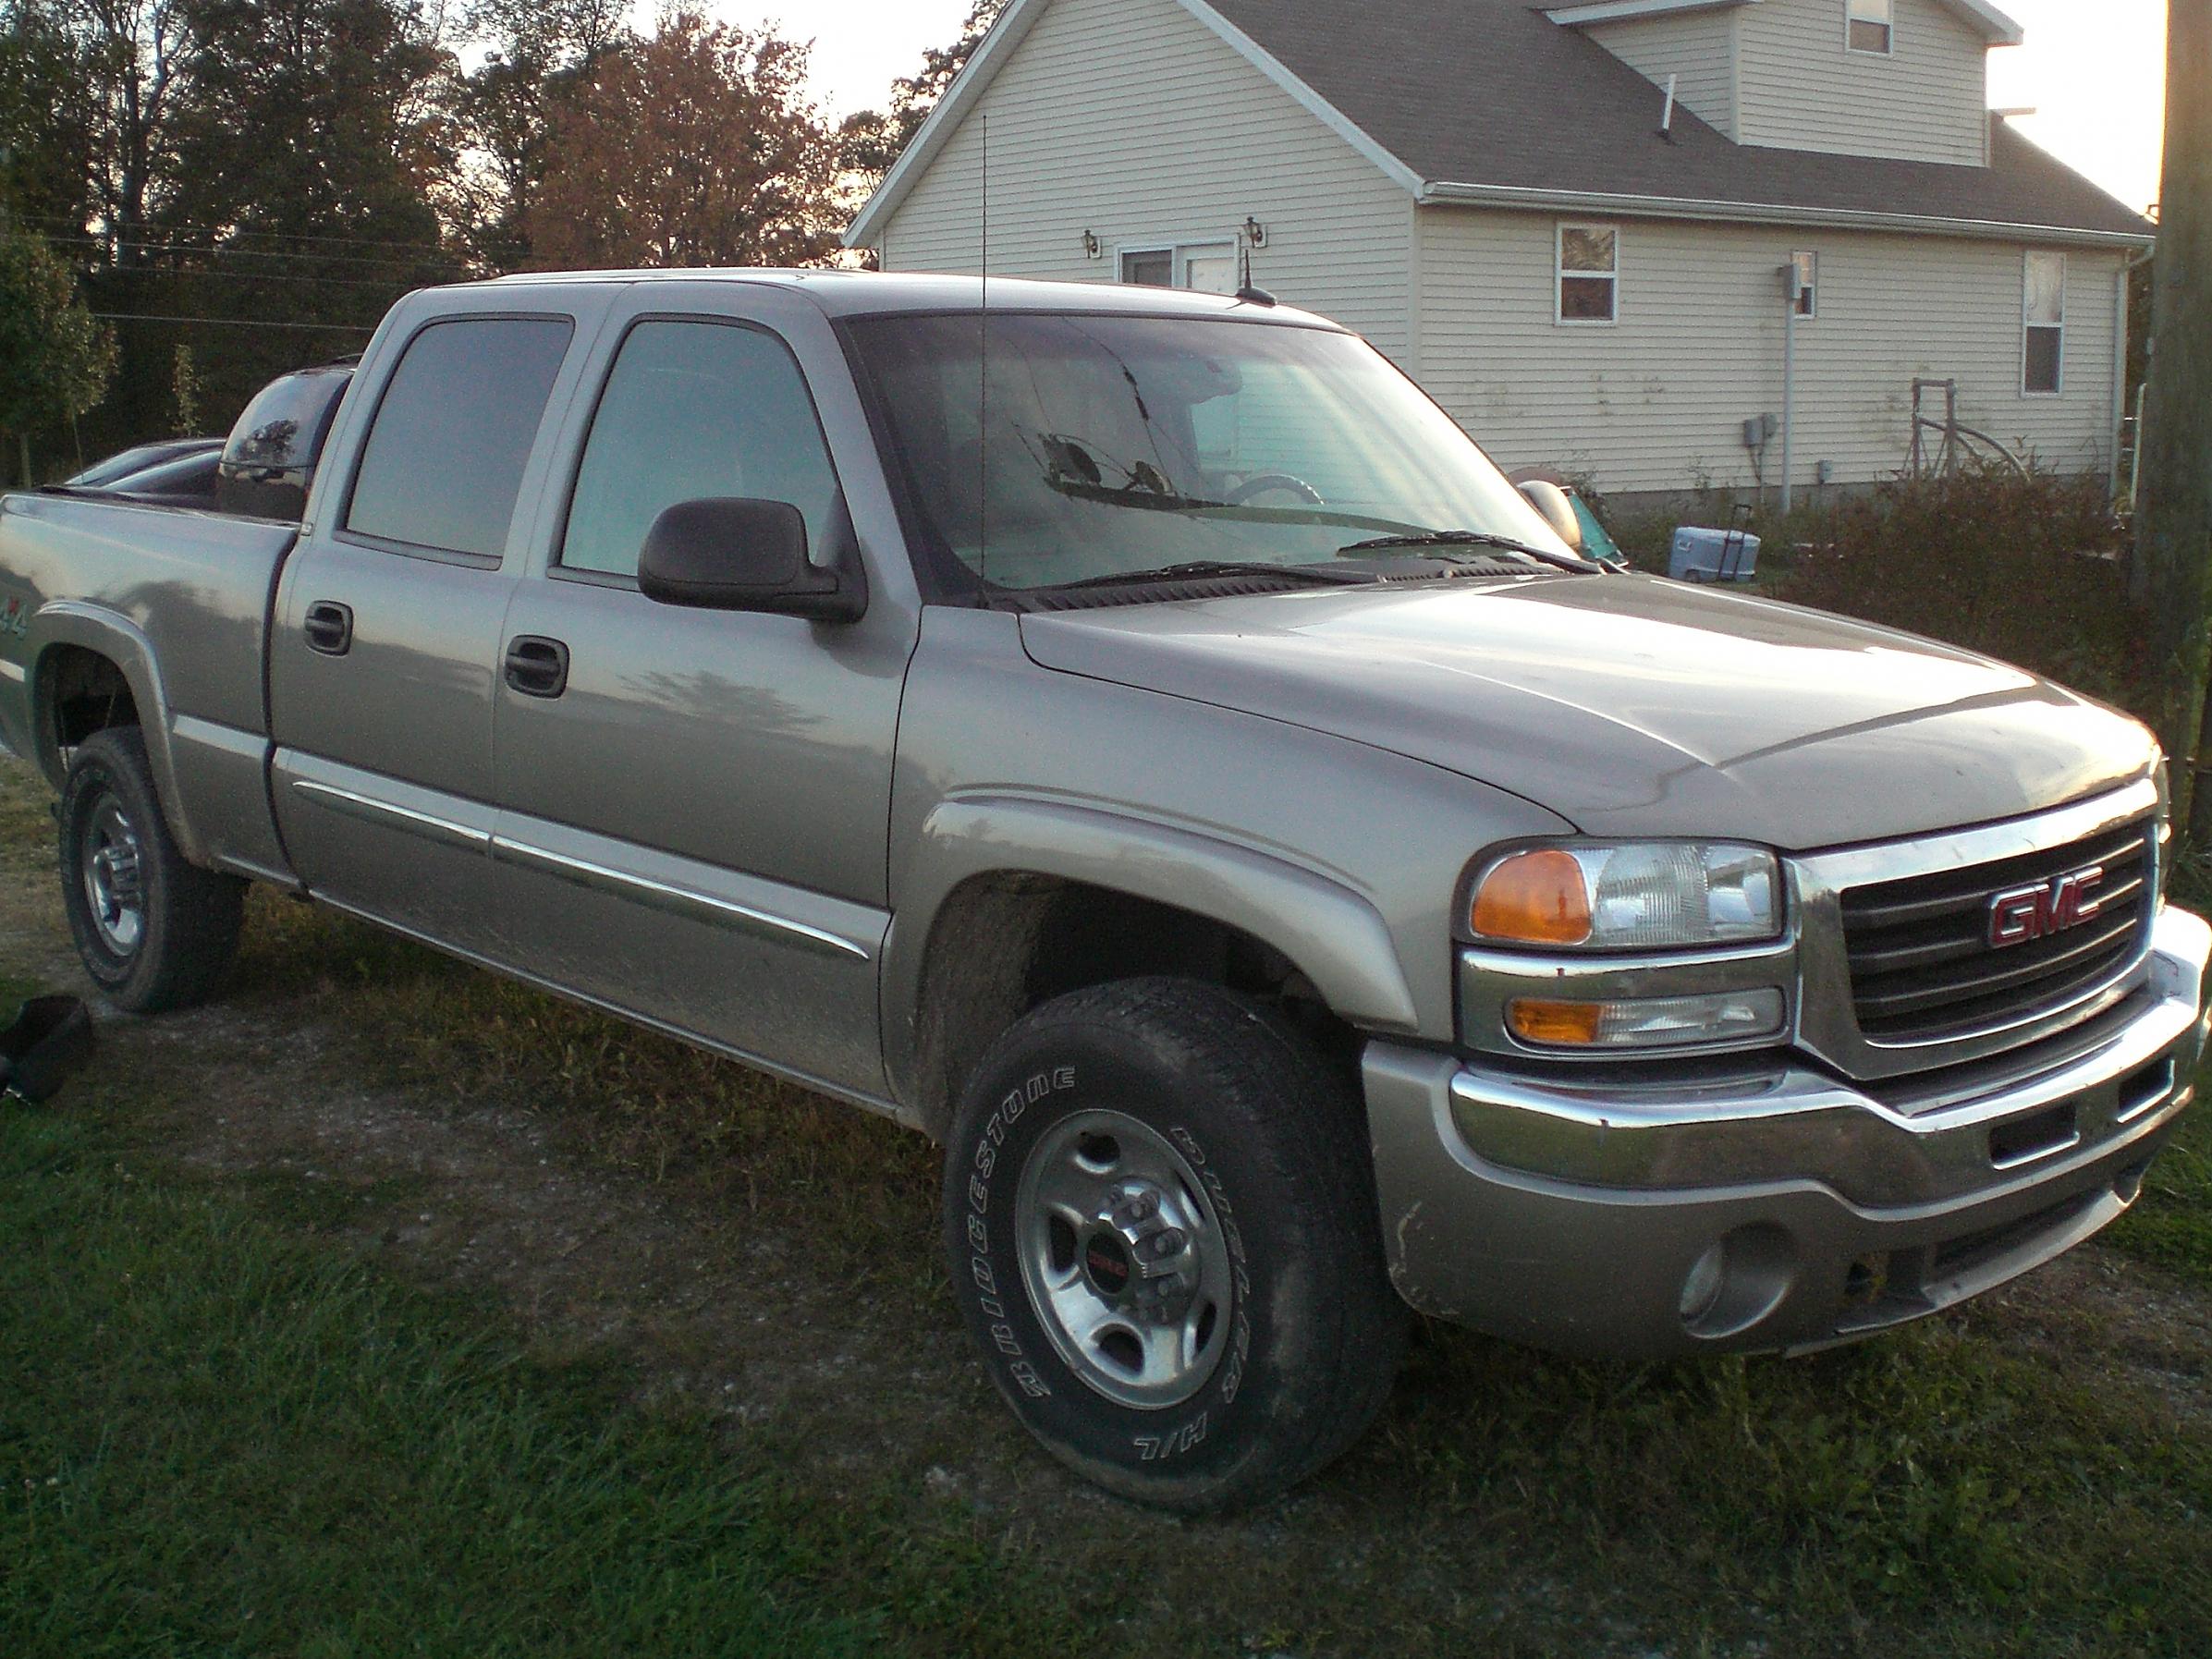 Picture of 2003 gmc truck #3